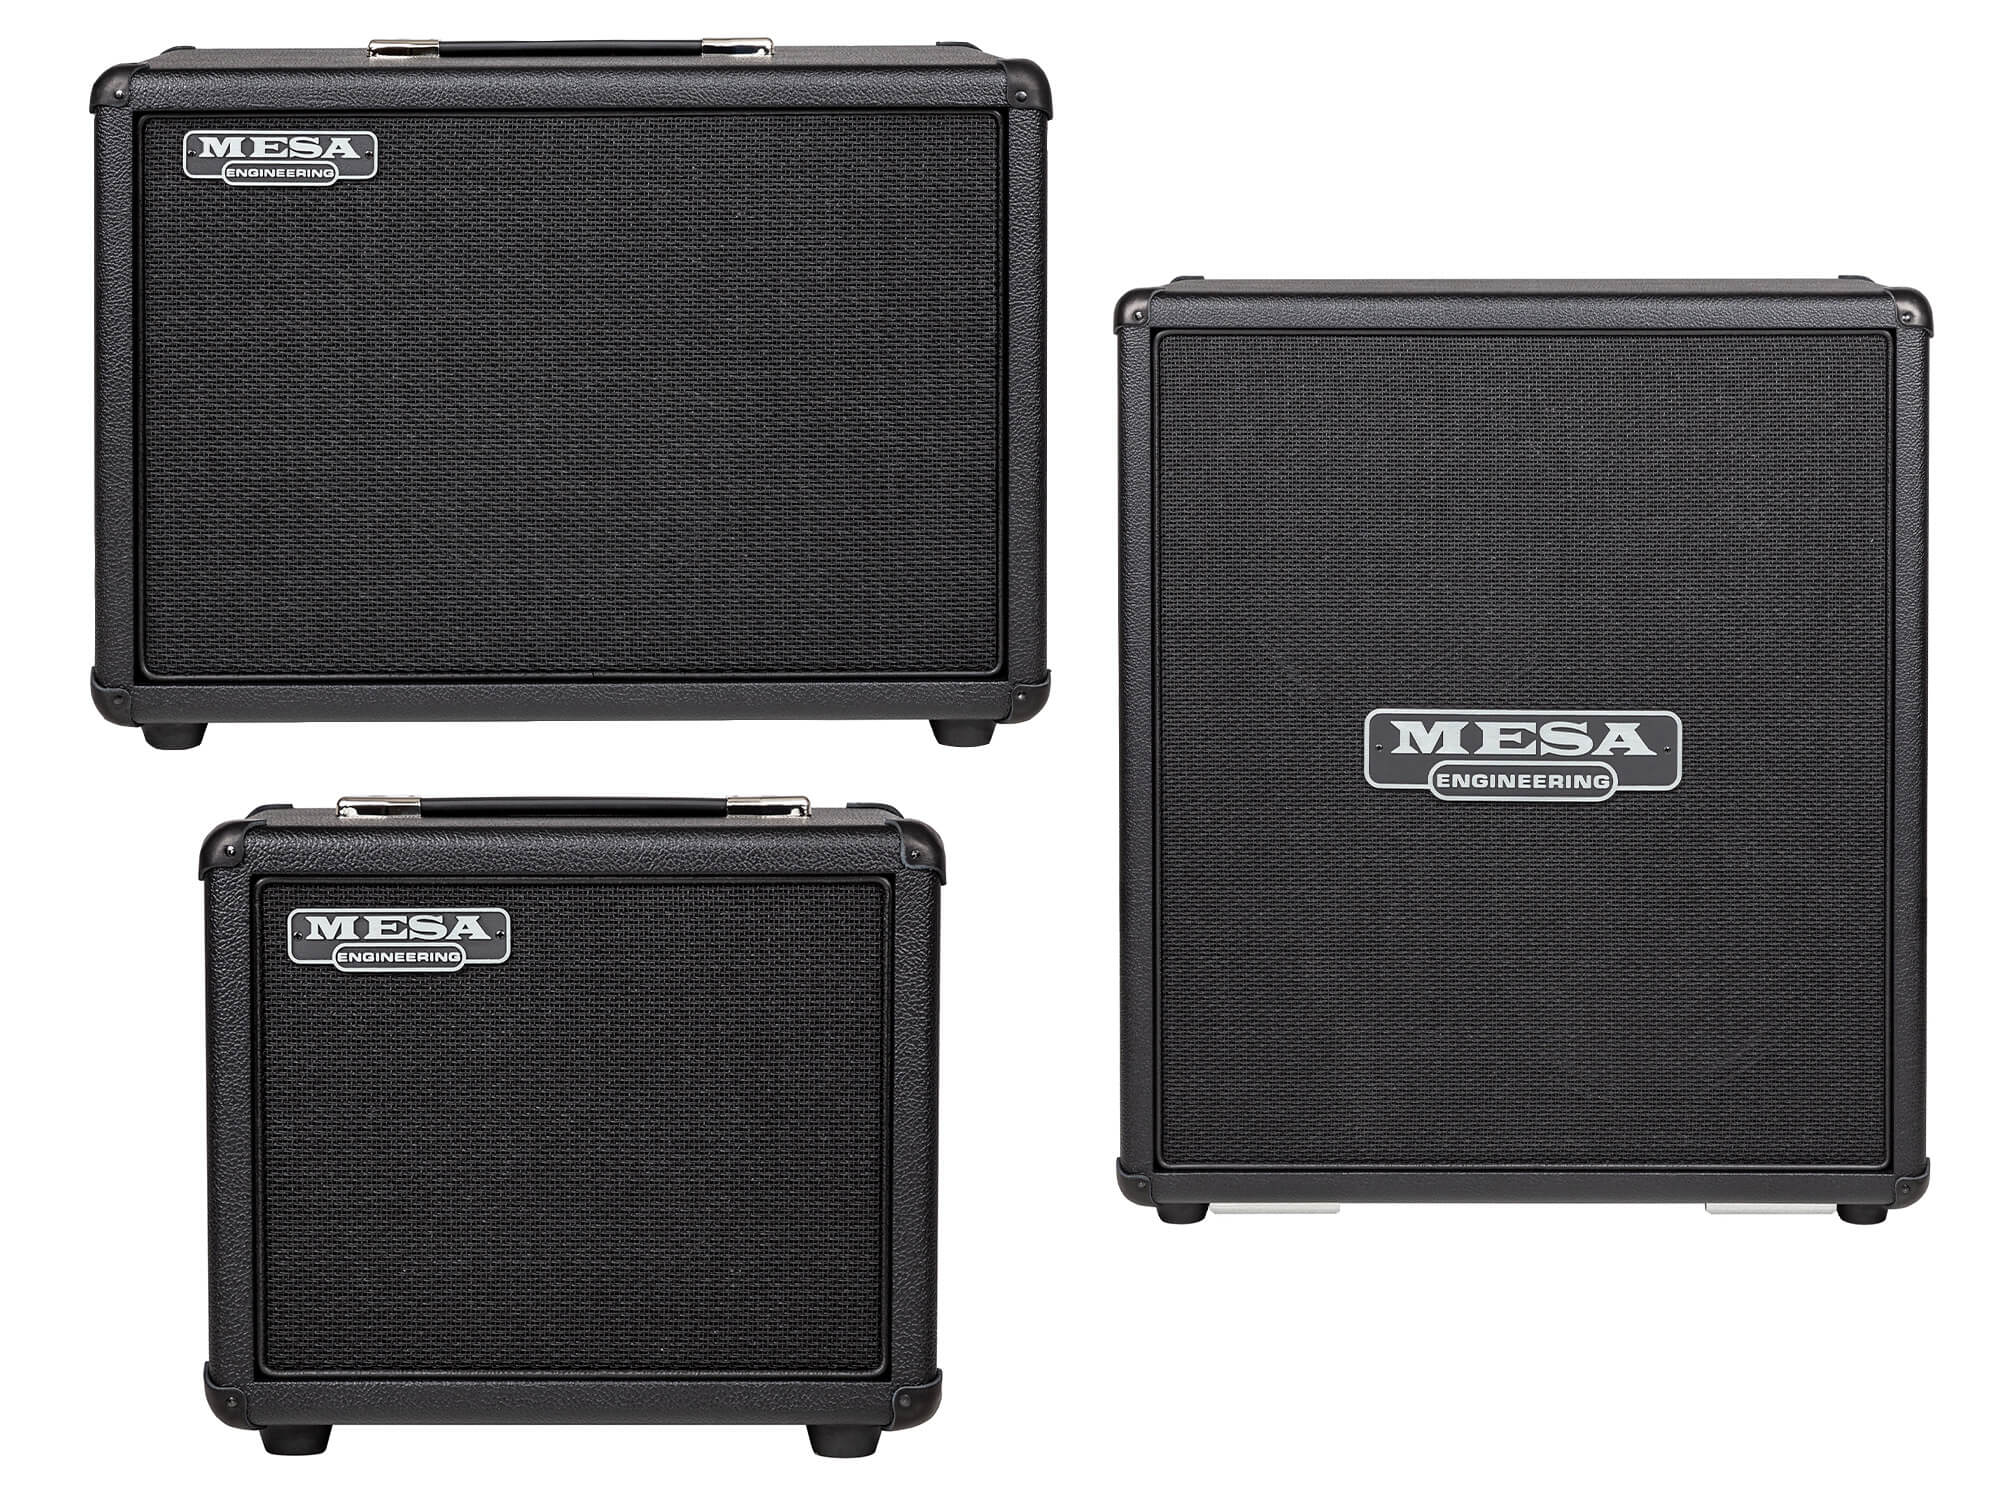 Mesa Boogie Rectifier cabinets, in all three sizes. They are all black and have the Mesa logo written in white on the front.